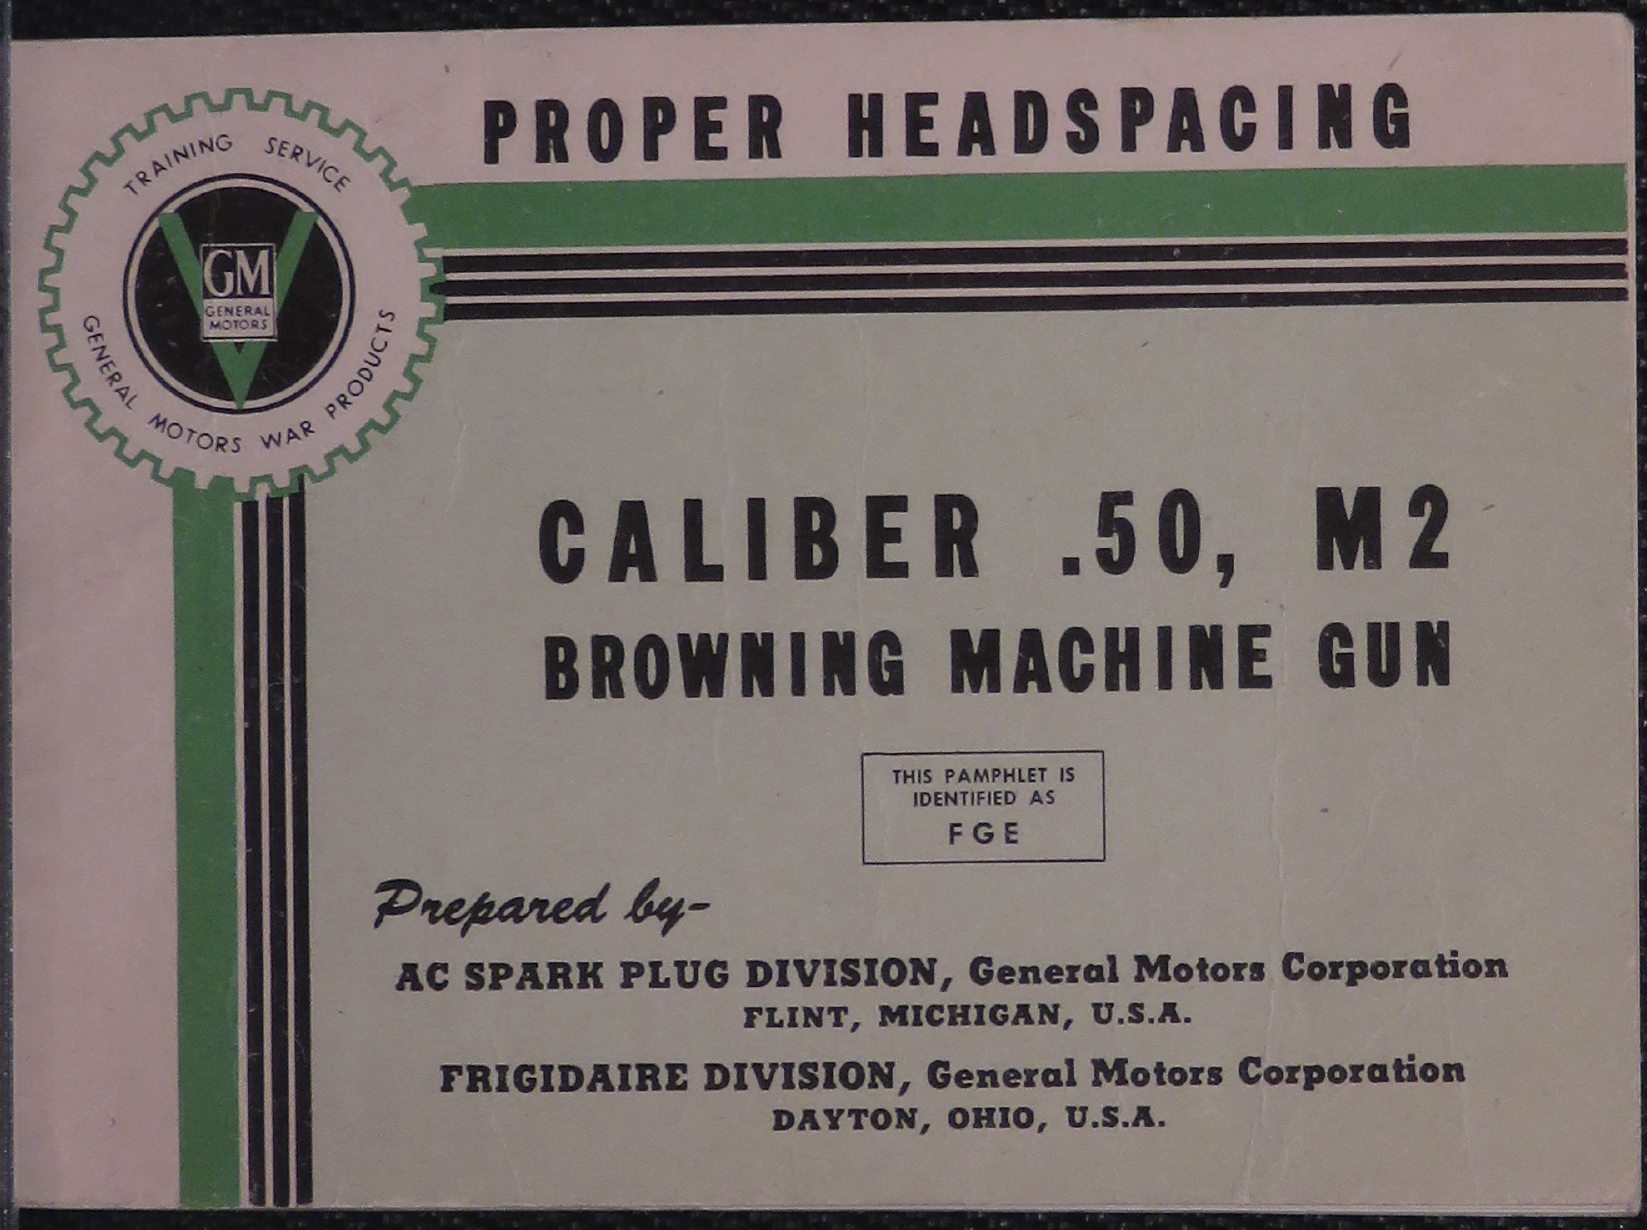 Sample page 1 from AirCorps Library document: Proper Headspacing for the Caliber .50, M2 Browning Machine Gun